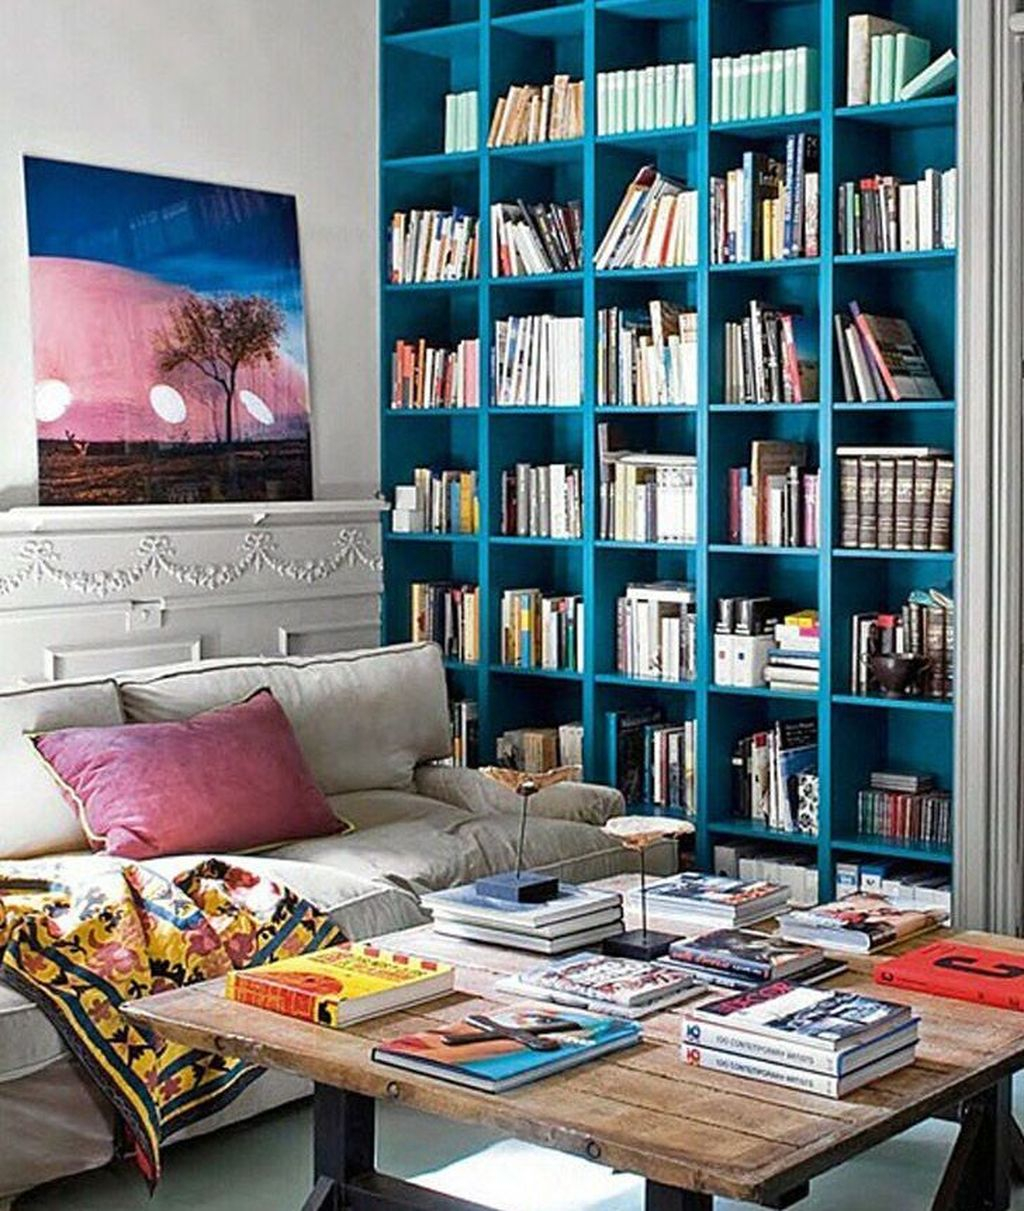 Smart Library Design Ideas For Home To Add To Your List 16